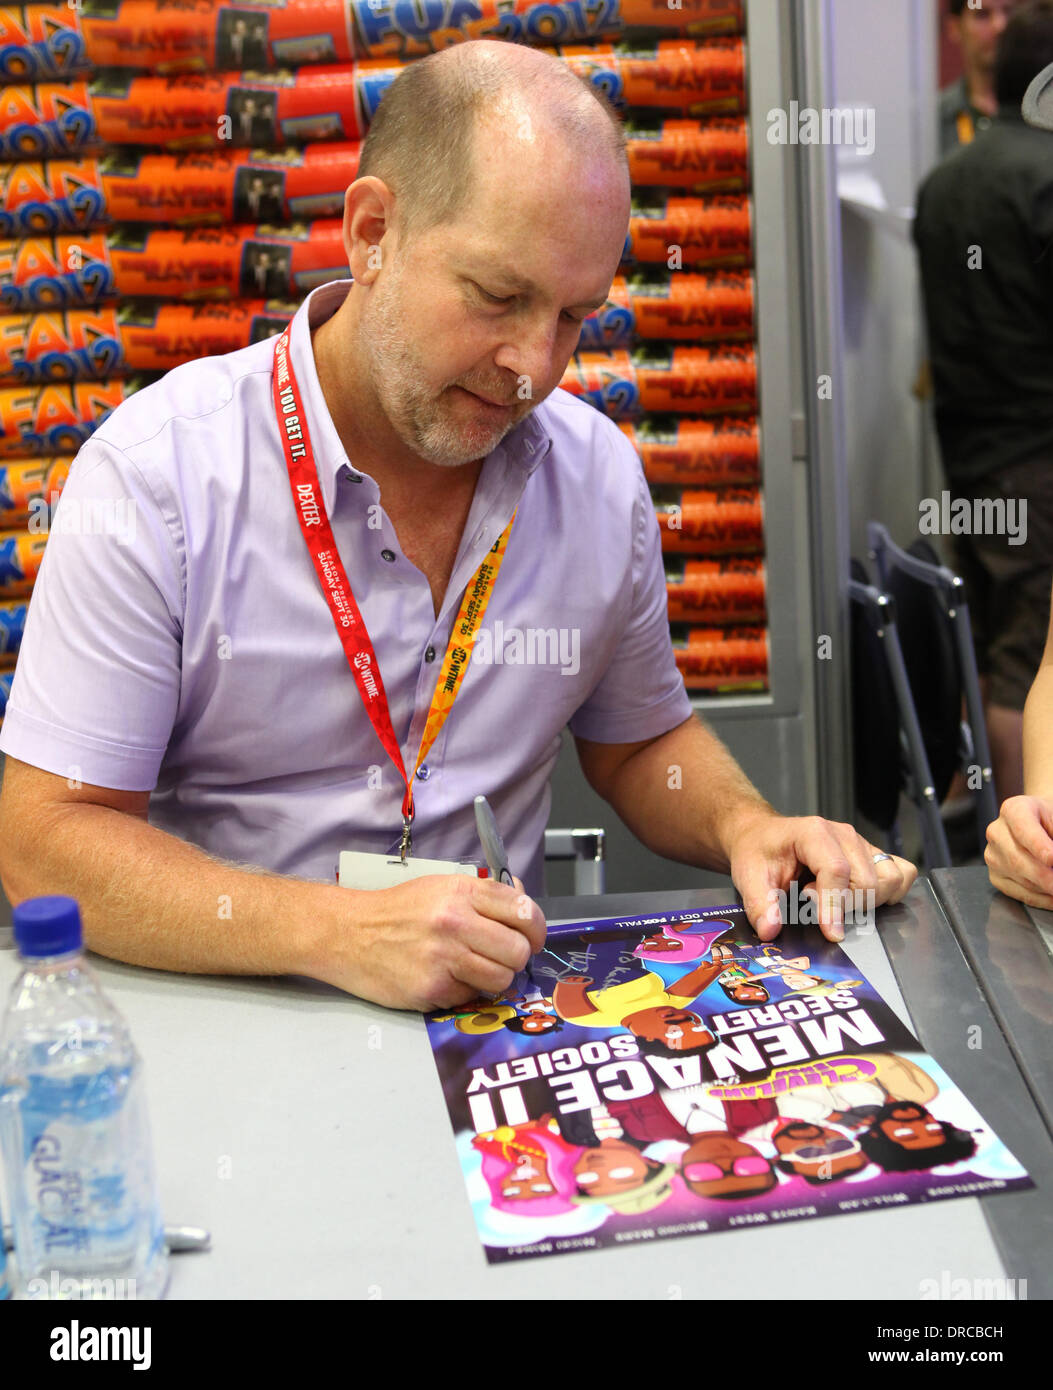 Mike Henry San Diego Comic-Con 2012 - 'The Cleveland Show' - Booth Signing San Diego, California - 15.07.12 Stock Photo